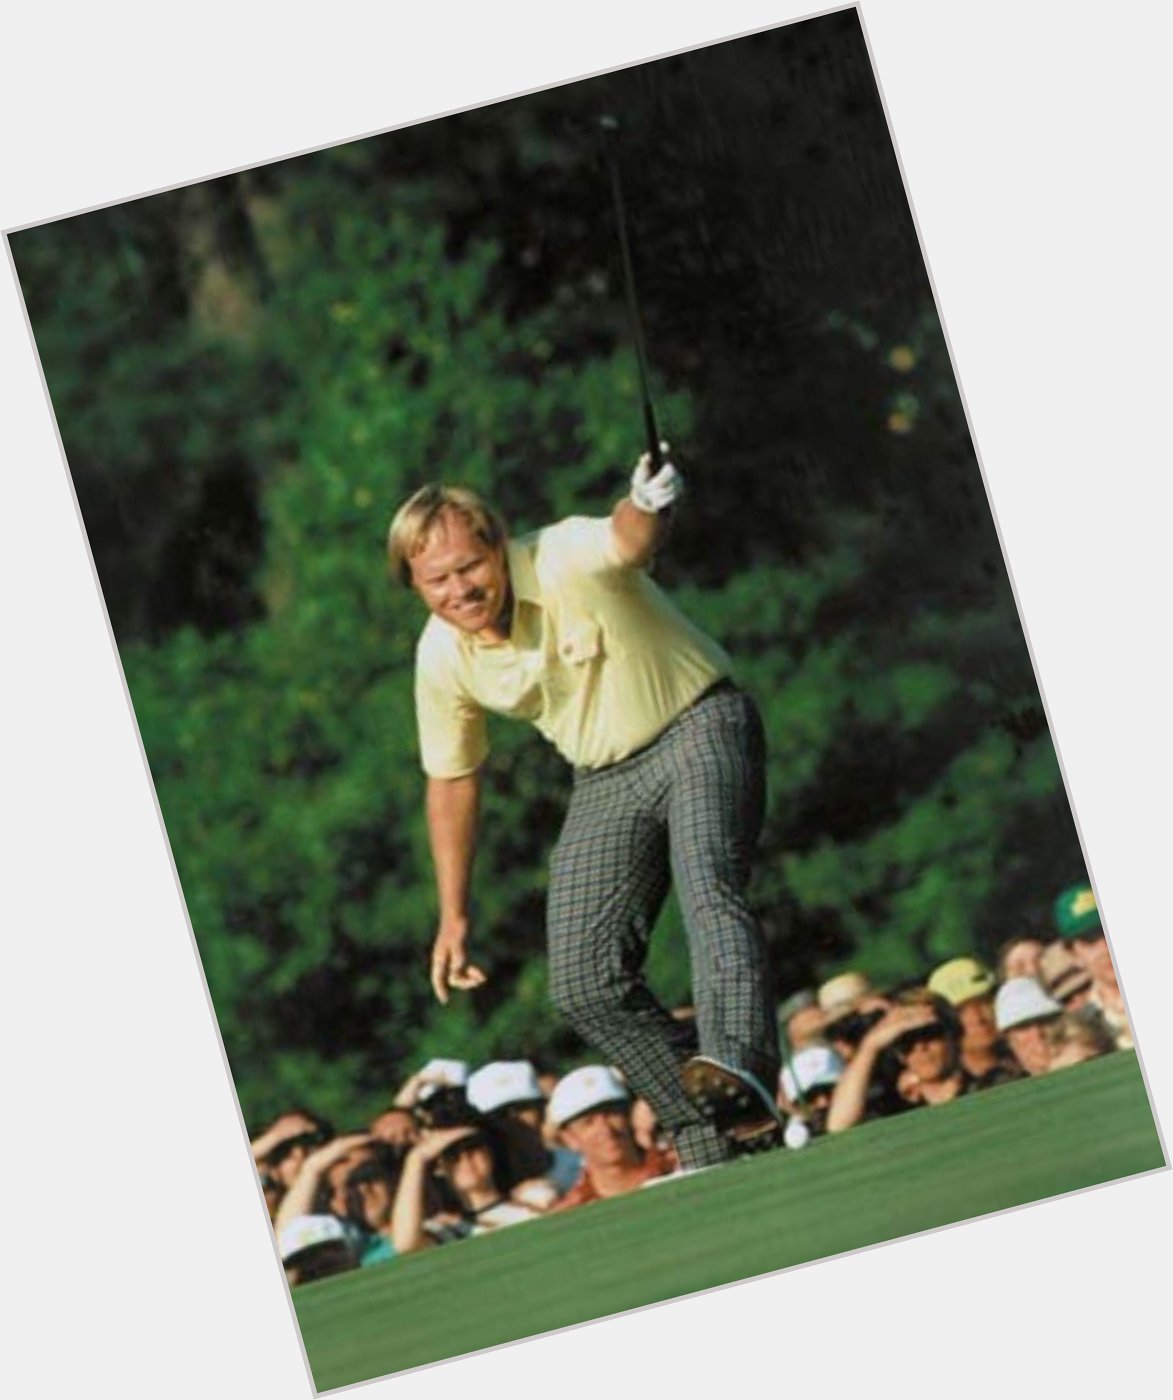 Jack Nicklaus Happy Birthday To The Greatest To Ever Lace Them Up! 